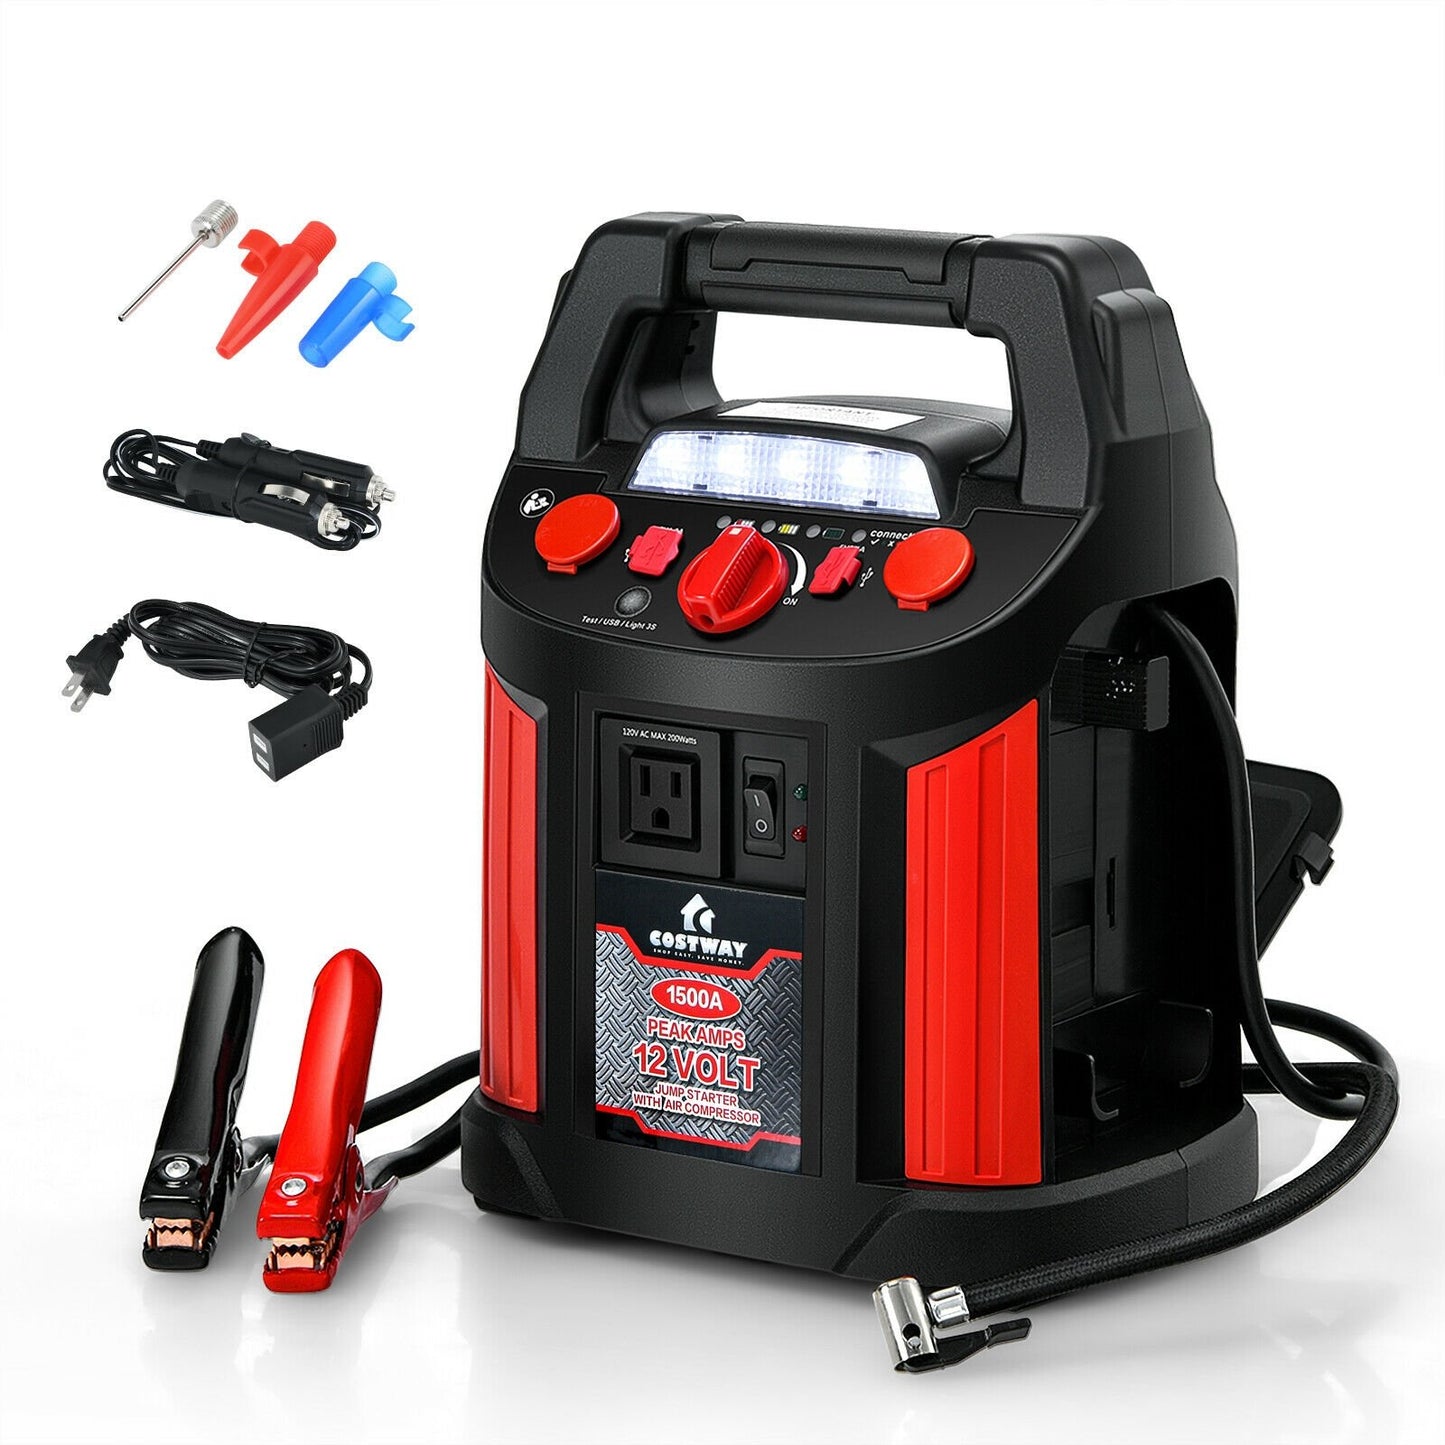 Jump Starter Air Compressor Power Bank Charger with LED Light and DC Outlet, Black & Red